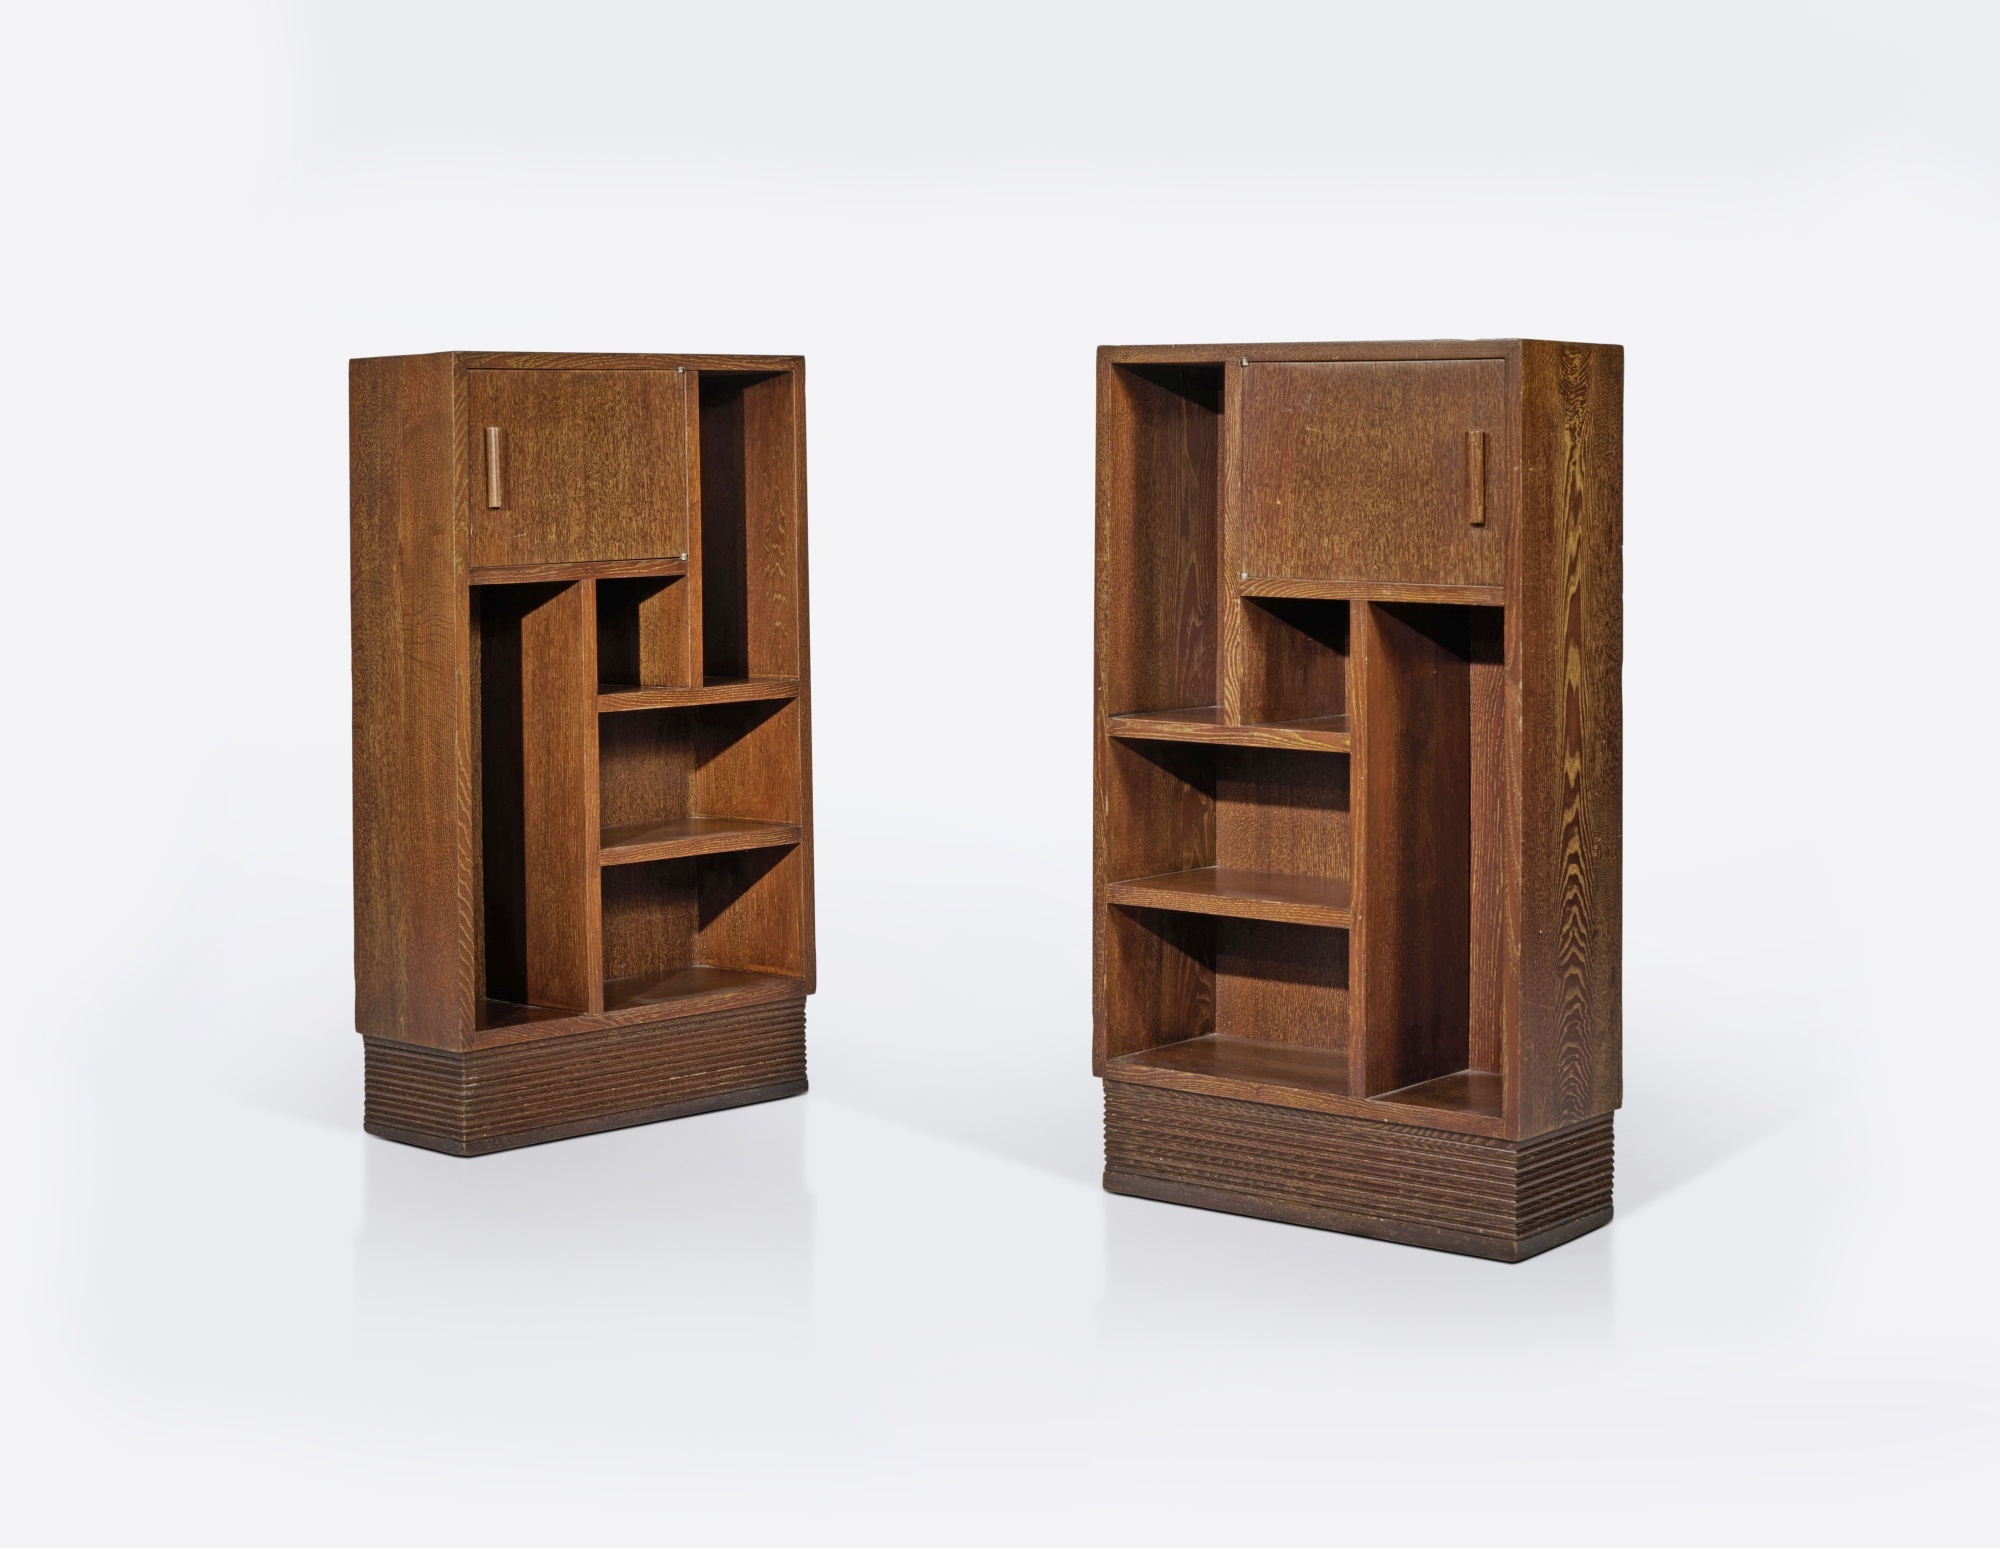 Artwork by Pierre Legrain, Pair of Bookcases, Made of cerused oak